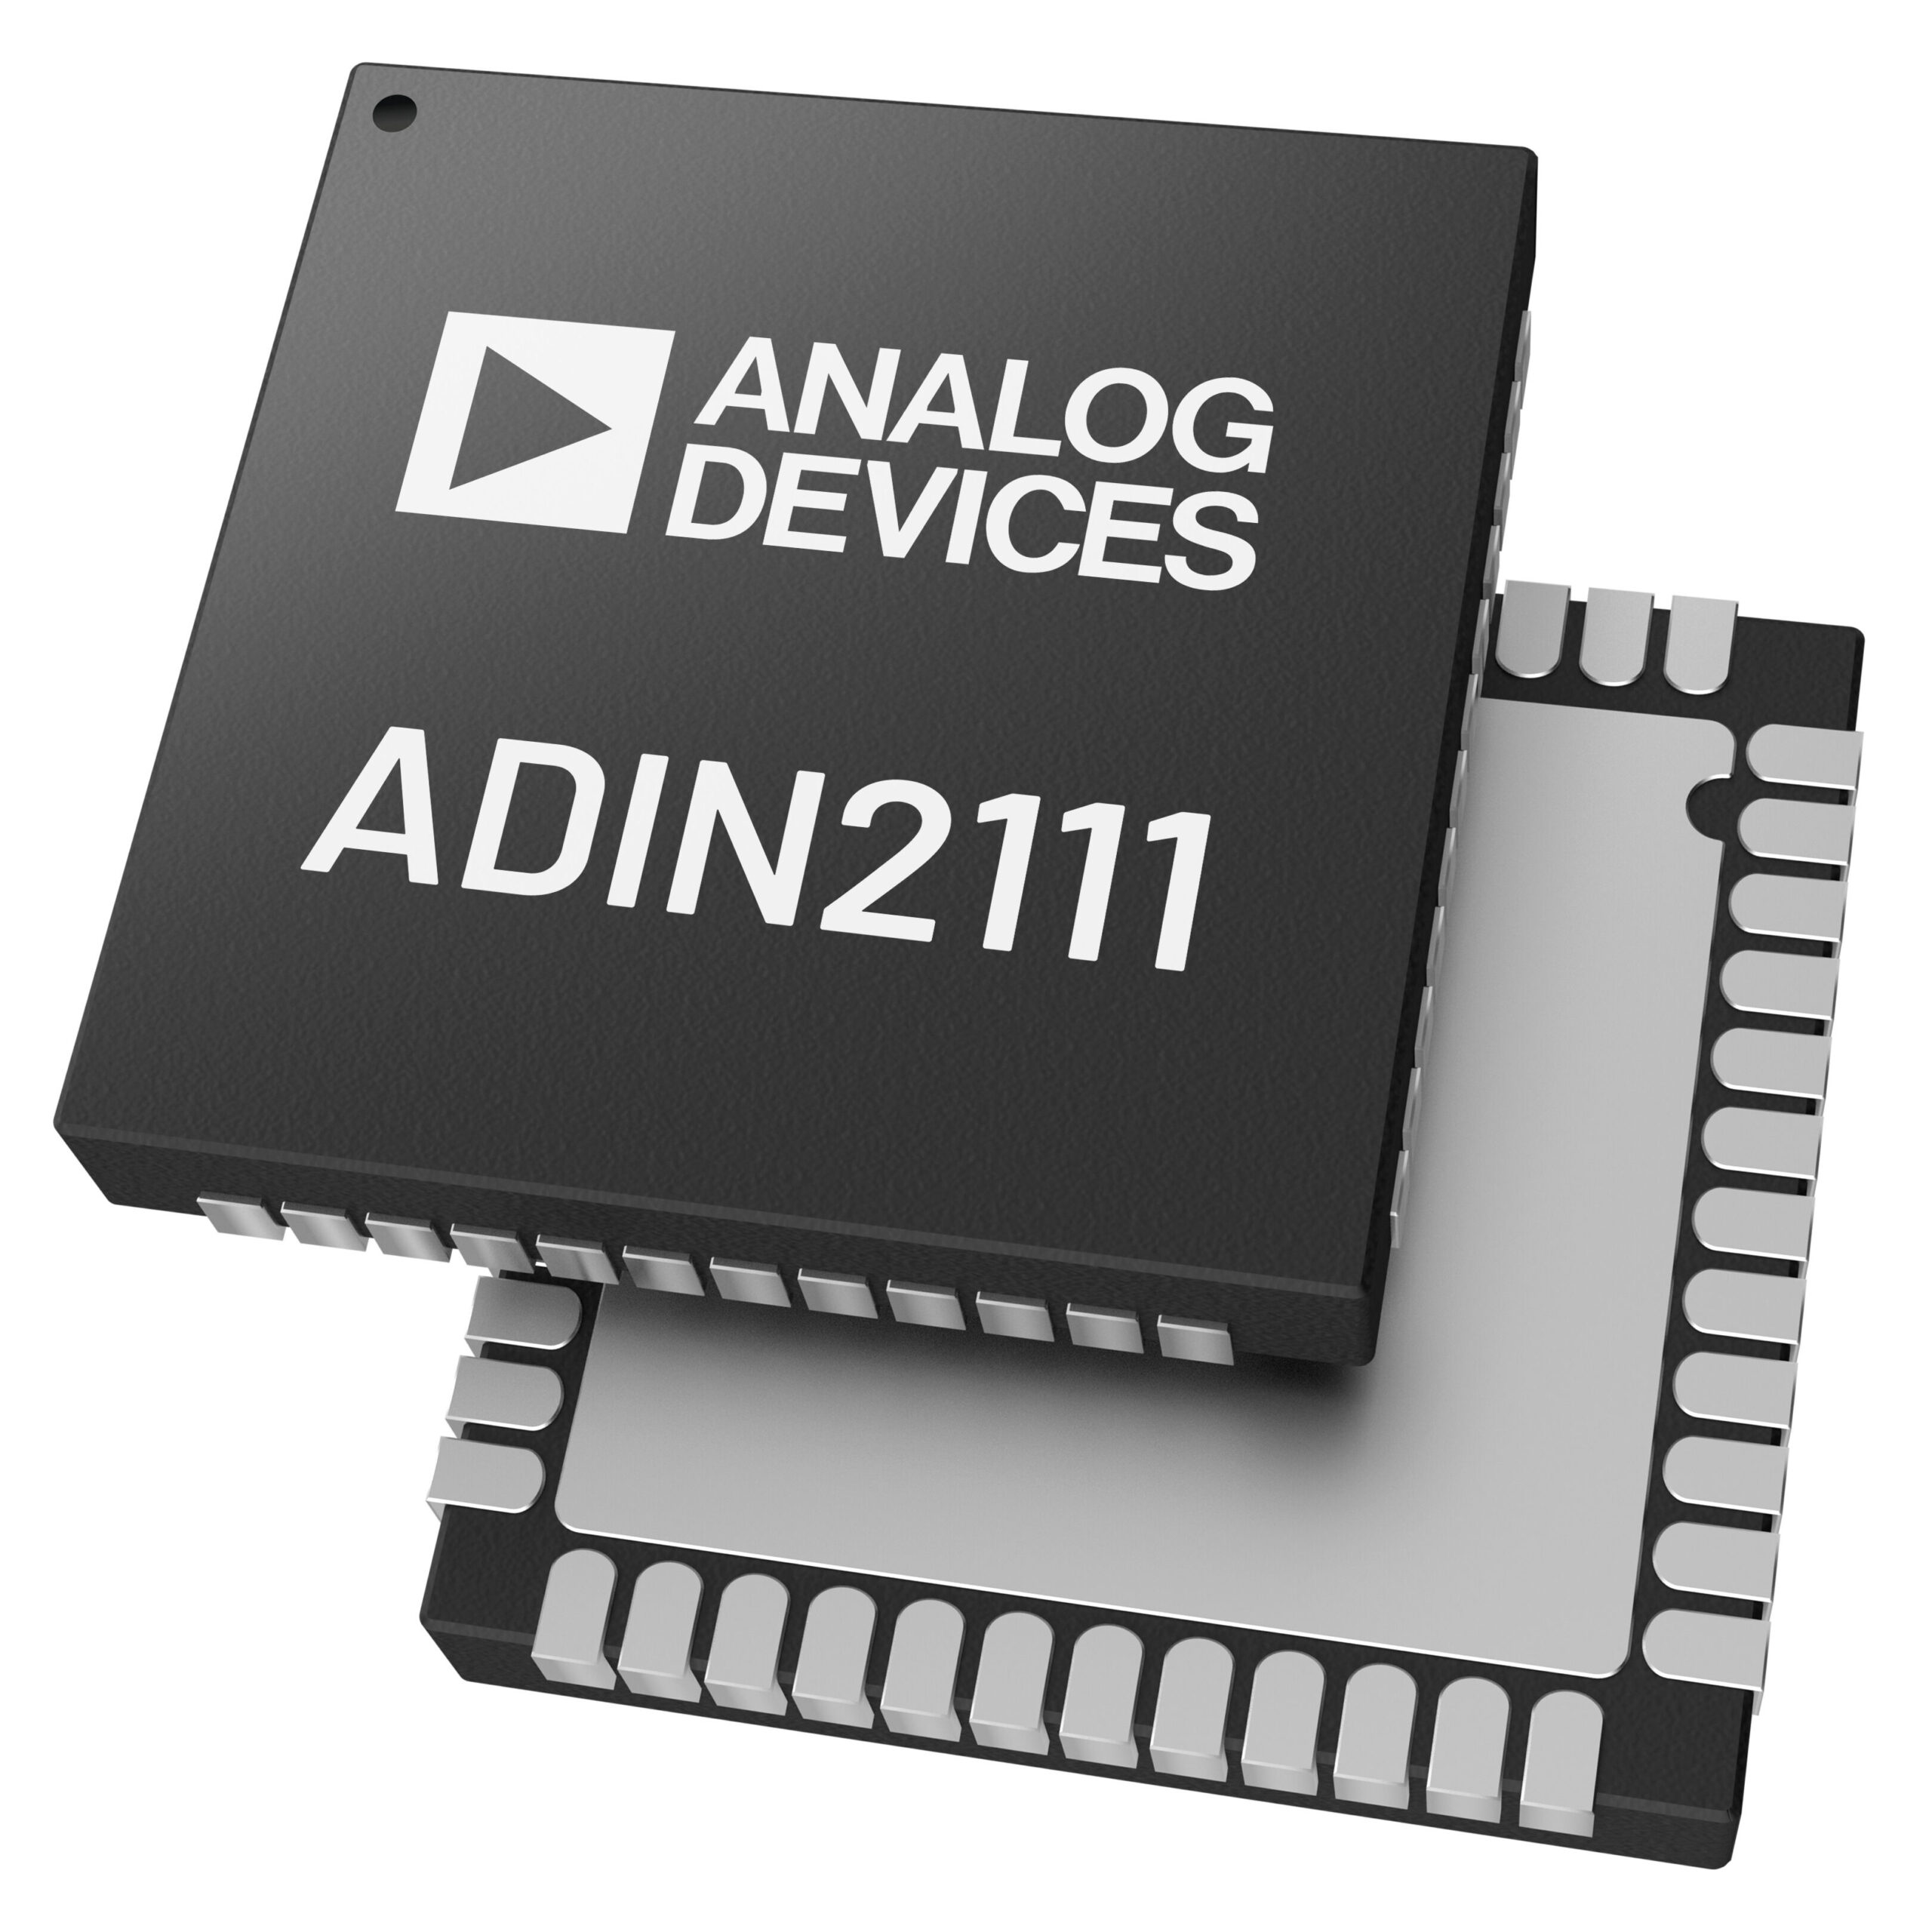 Analog Devices announces complete long reach Ethernet solution for digitising building automation networks